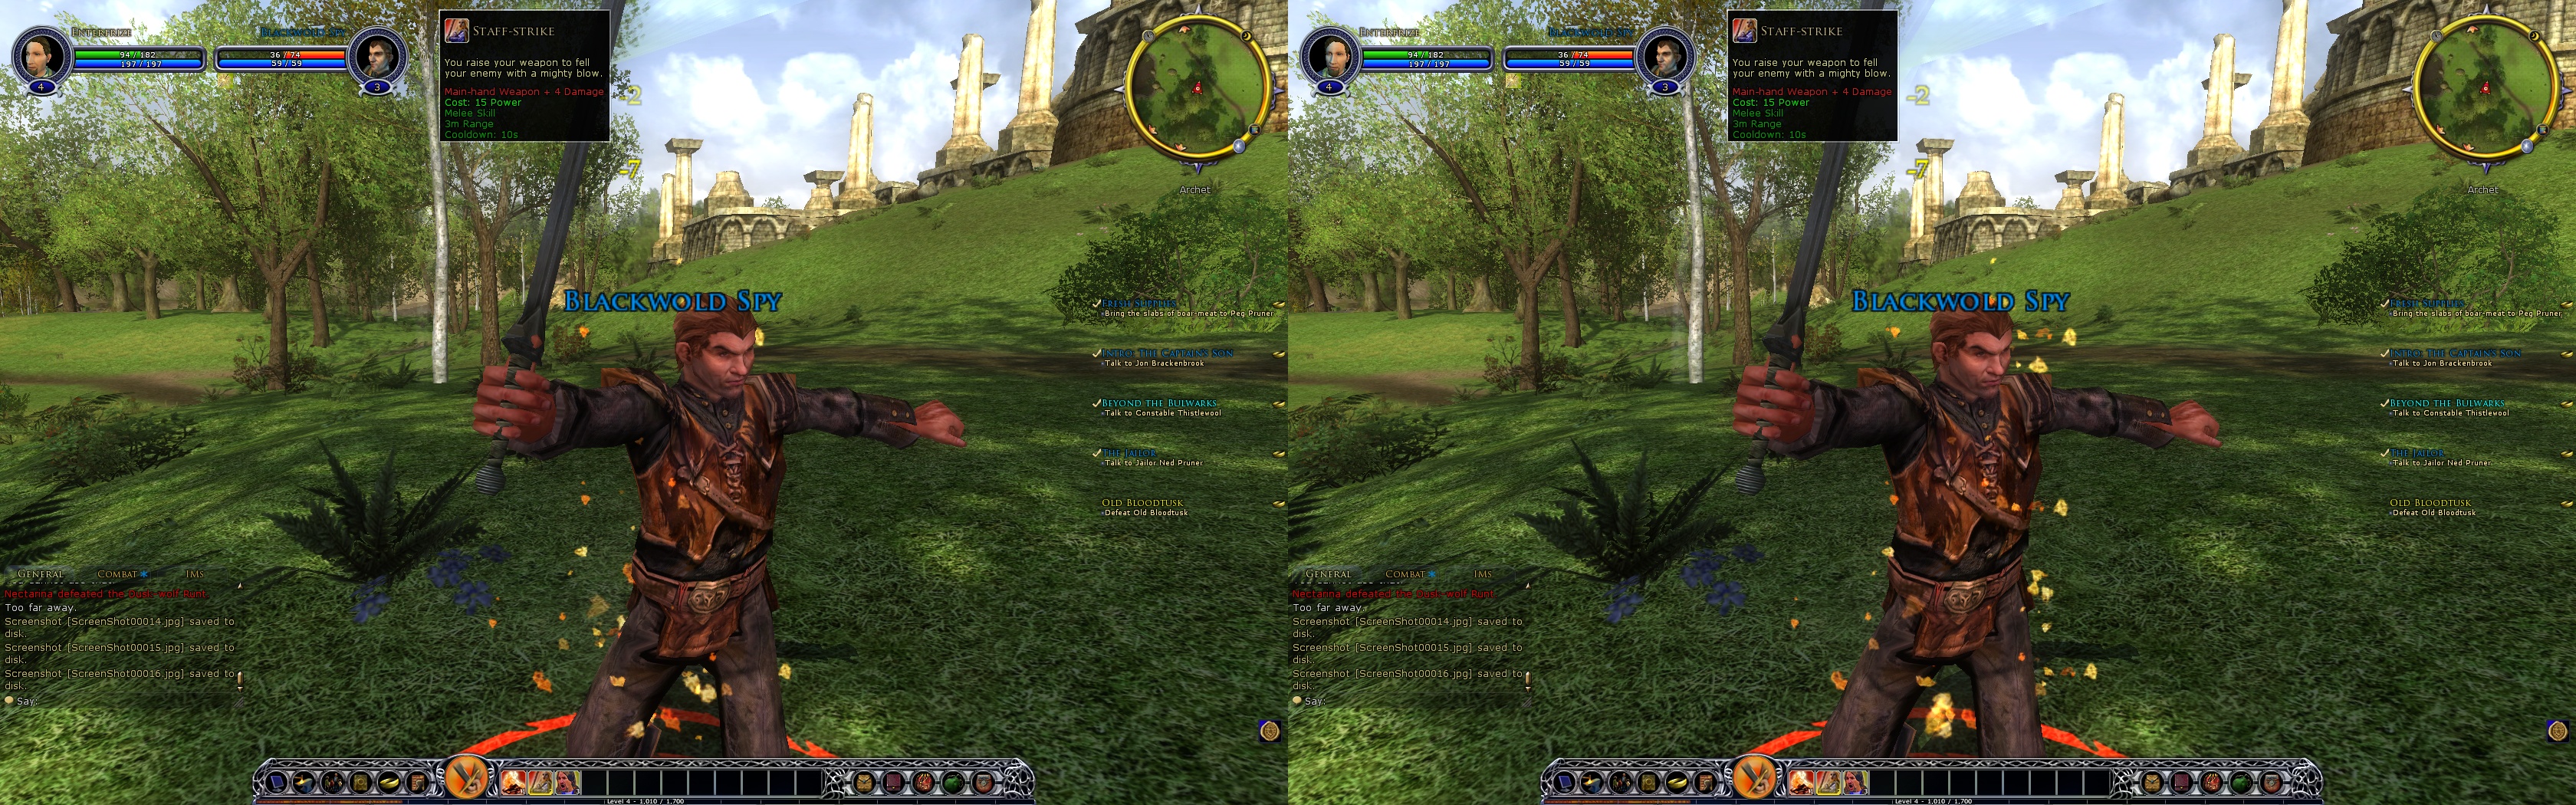 Lord of the Rings Online Shadows of Angmar (LOTRO) Review - Meant be Seen